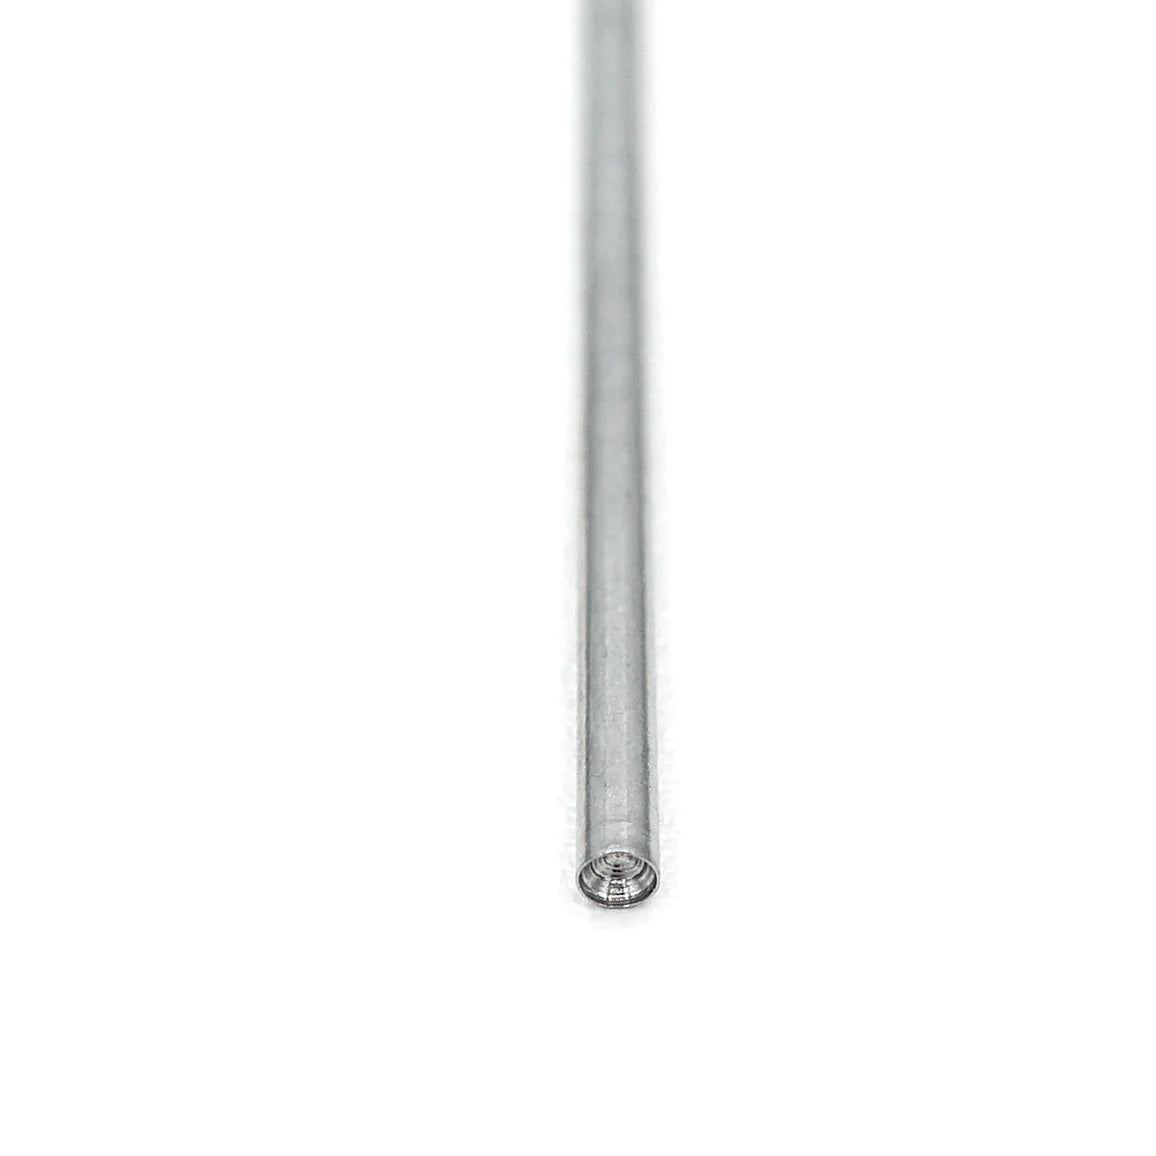 18G Tapers sterile pack of 50